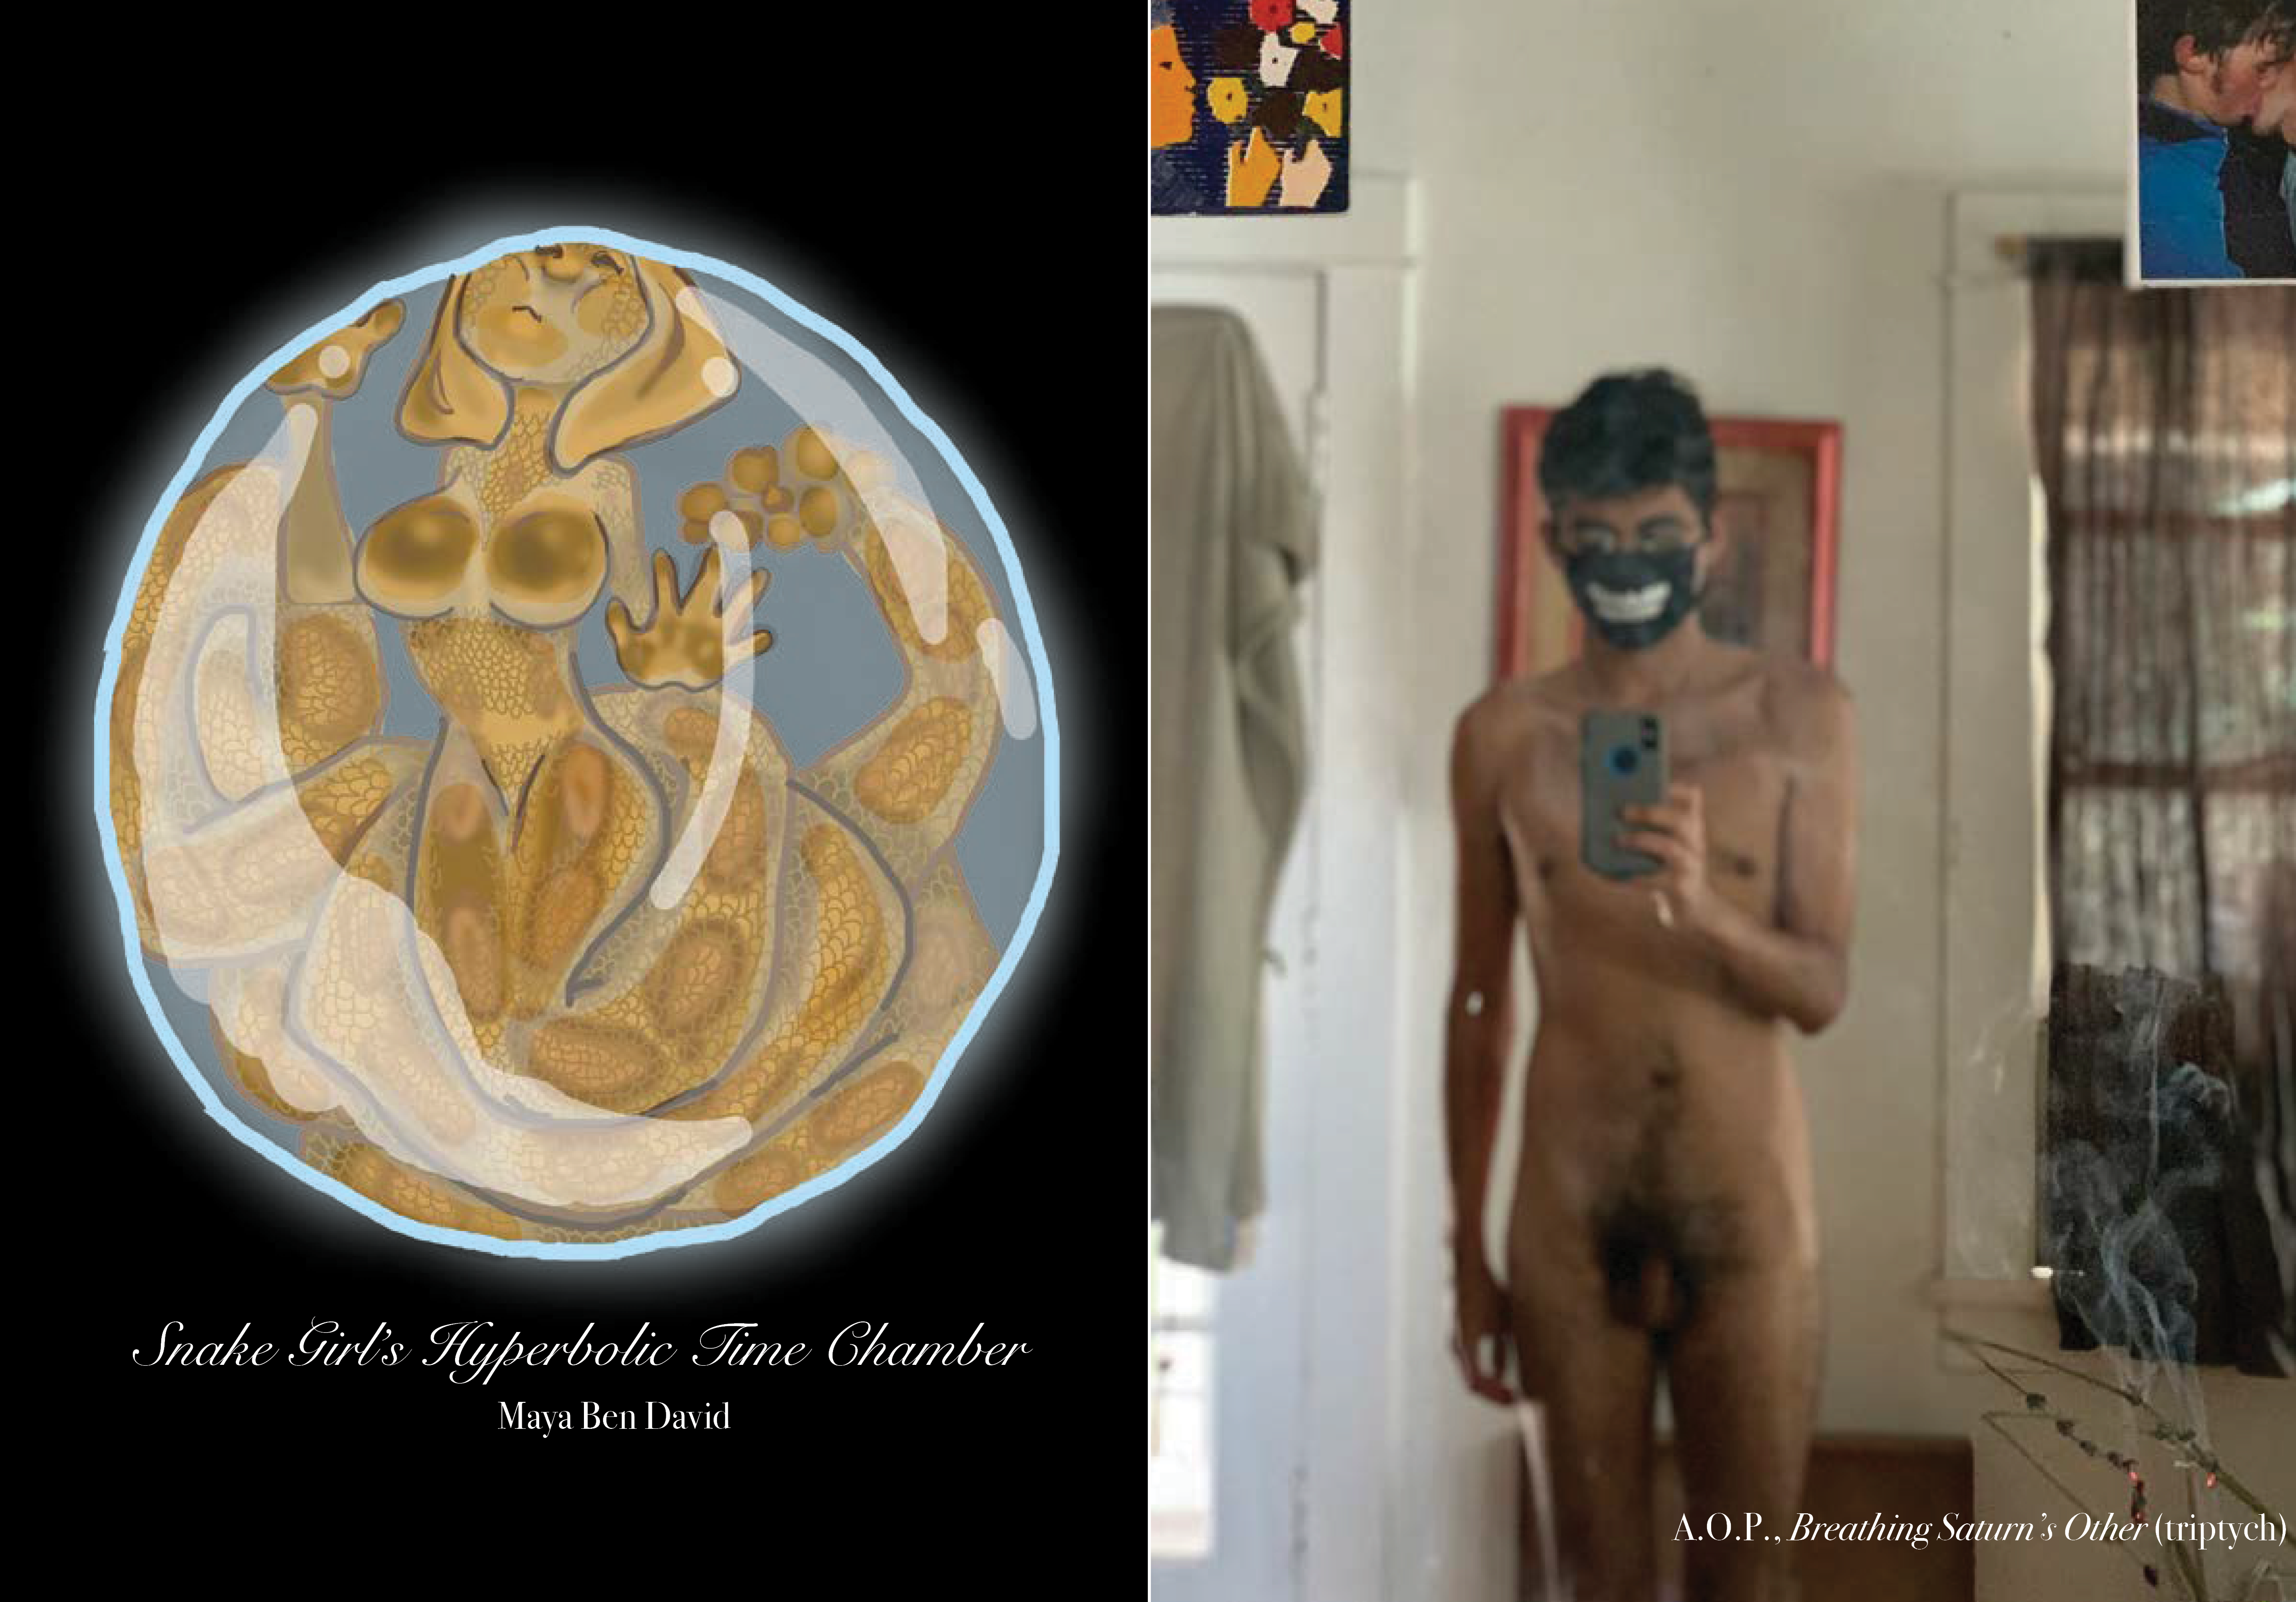 Page left: A femme person covered in brown scaly snake skin, whose legs unravel into a long snakelike end, puts her hands up against the transparent bubble in which she is enclosed. Page right: In the three photographs of this triptych, the artist stands nude in front of a mirror, taking a selfie while wearing sunglasses and a black surgical mask with a white graphic printed on the front. The mirror has a photo of two people kissing on the right corner and a graphic print of two facial profiles, two hands, and a bouquet of flowers on the top left corner. Aromatic plants burn in the bottom corners.